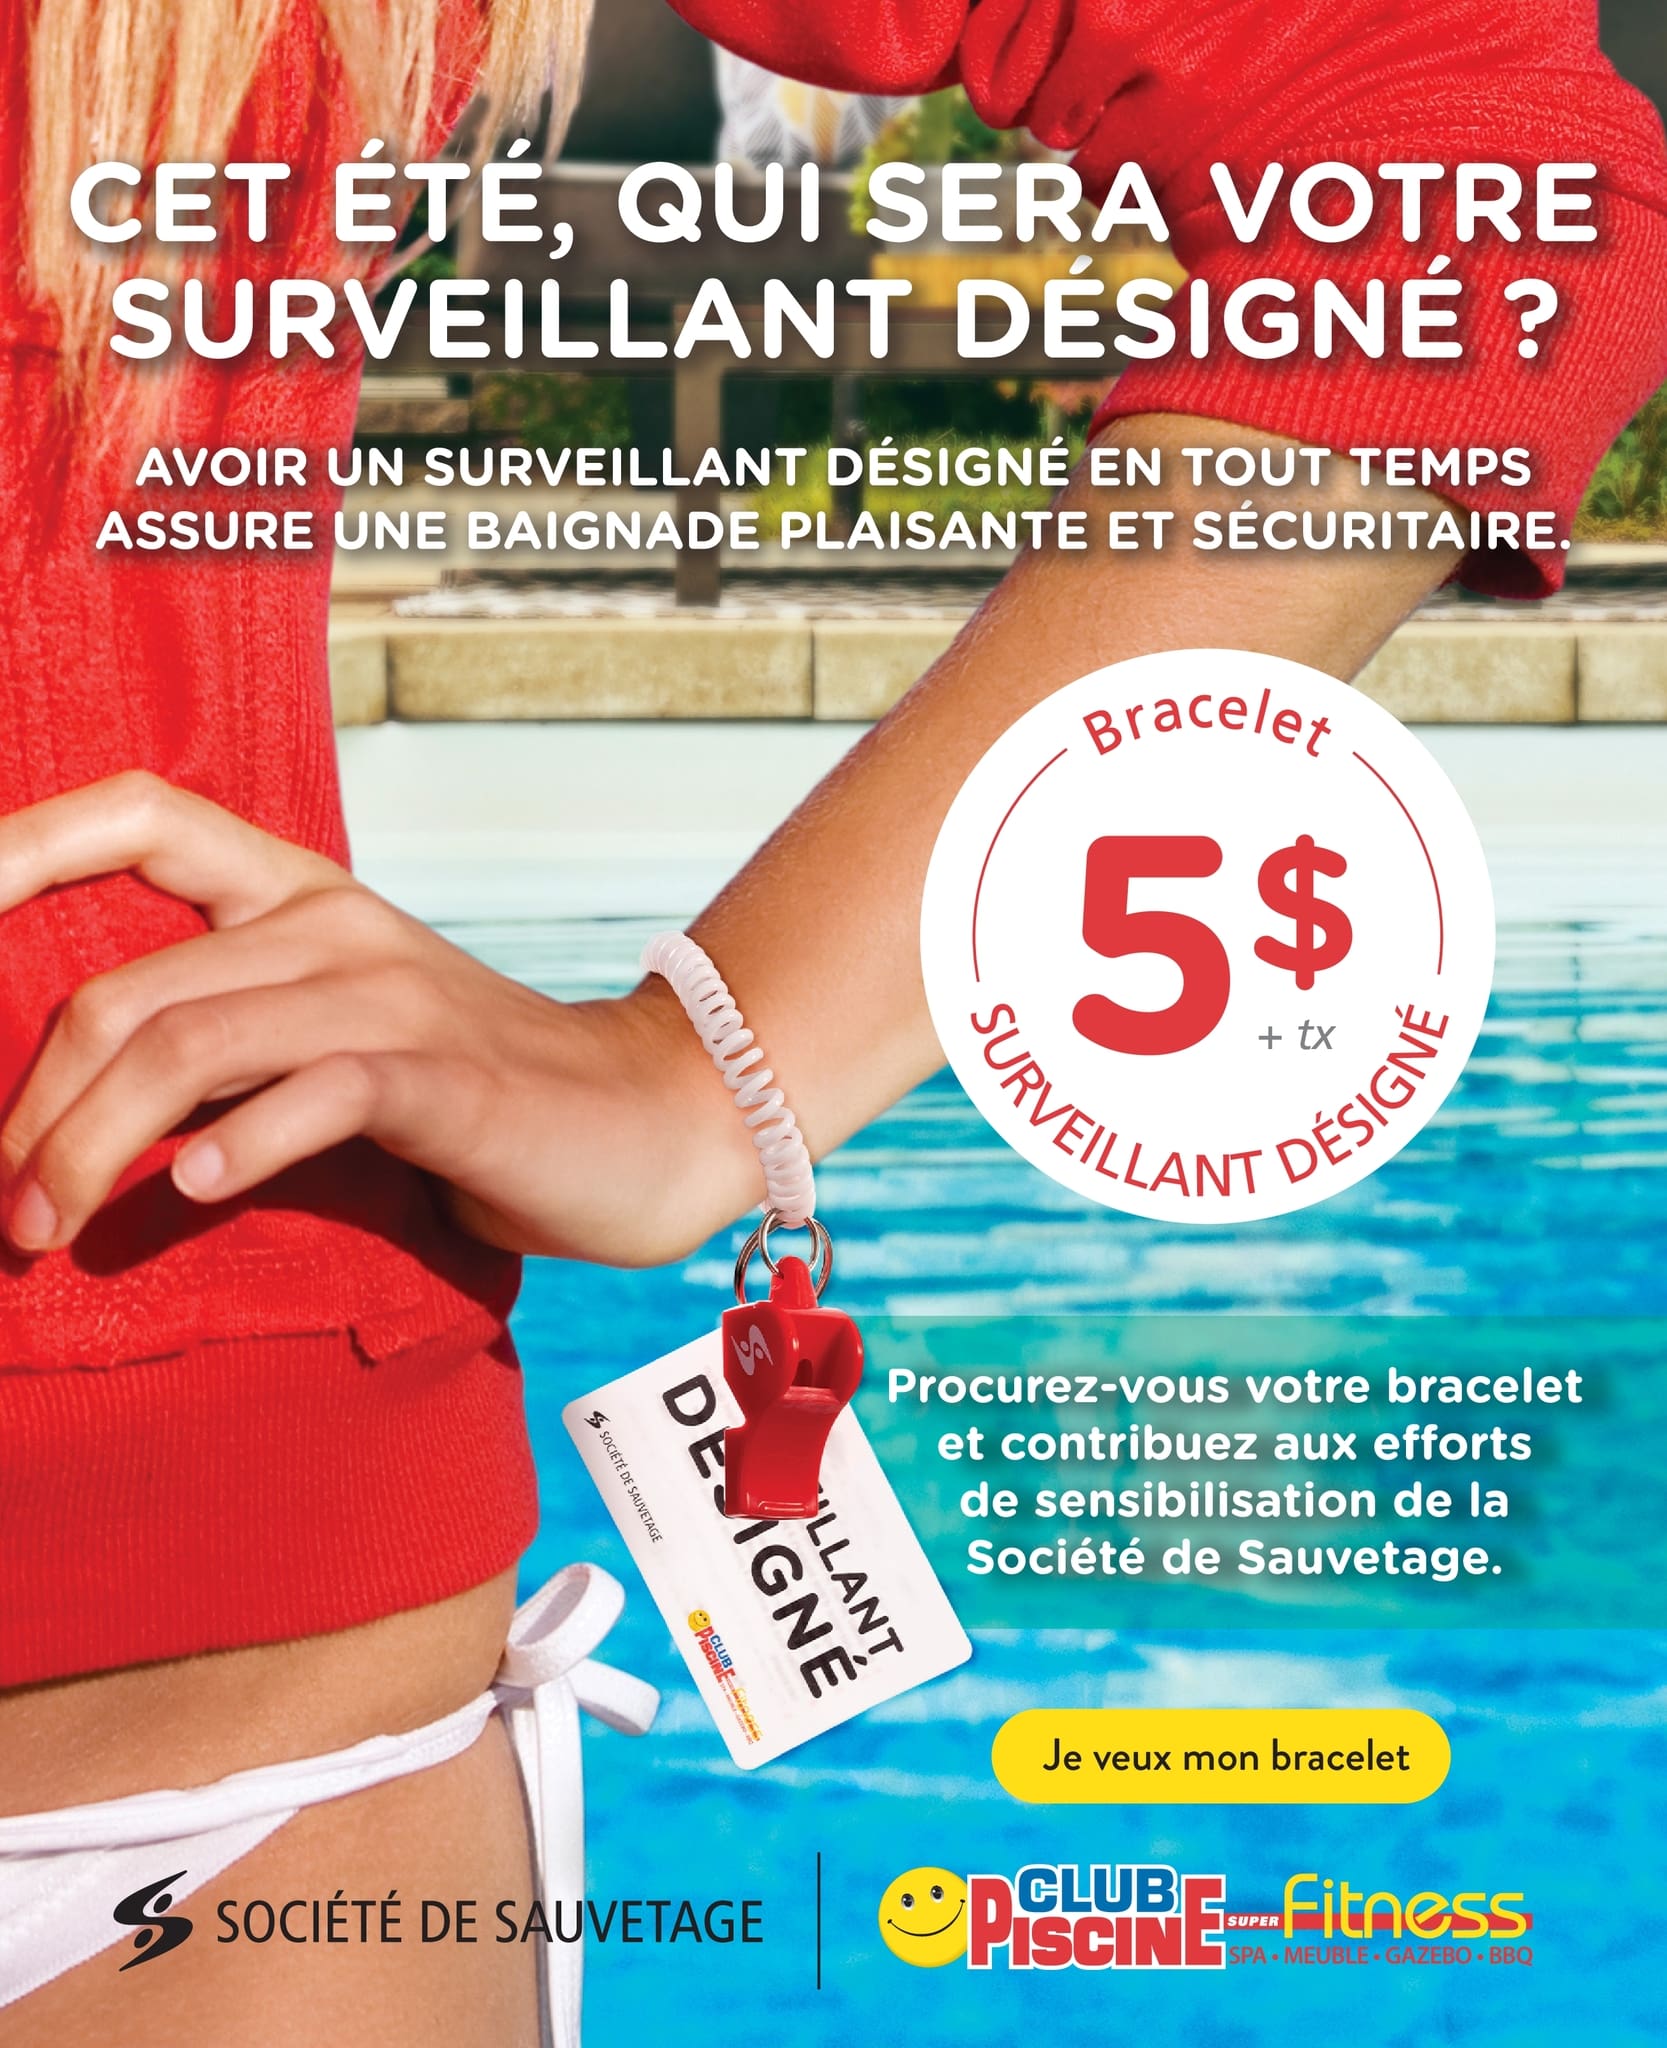 Circulaire Club Piscine Super Fitness - Page 17